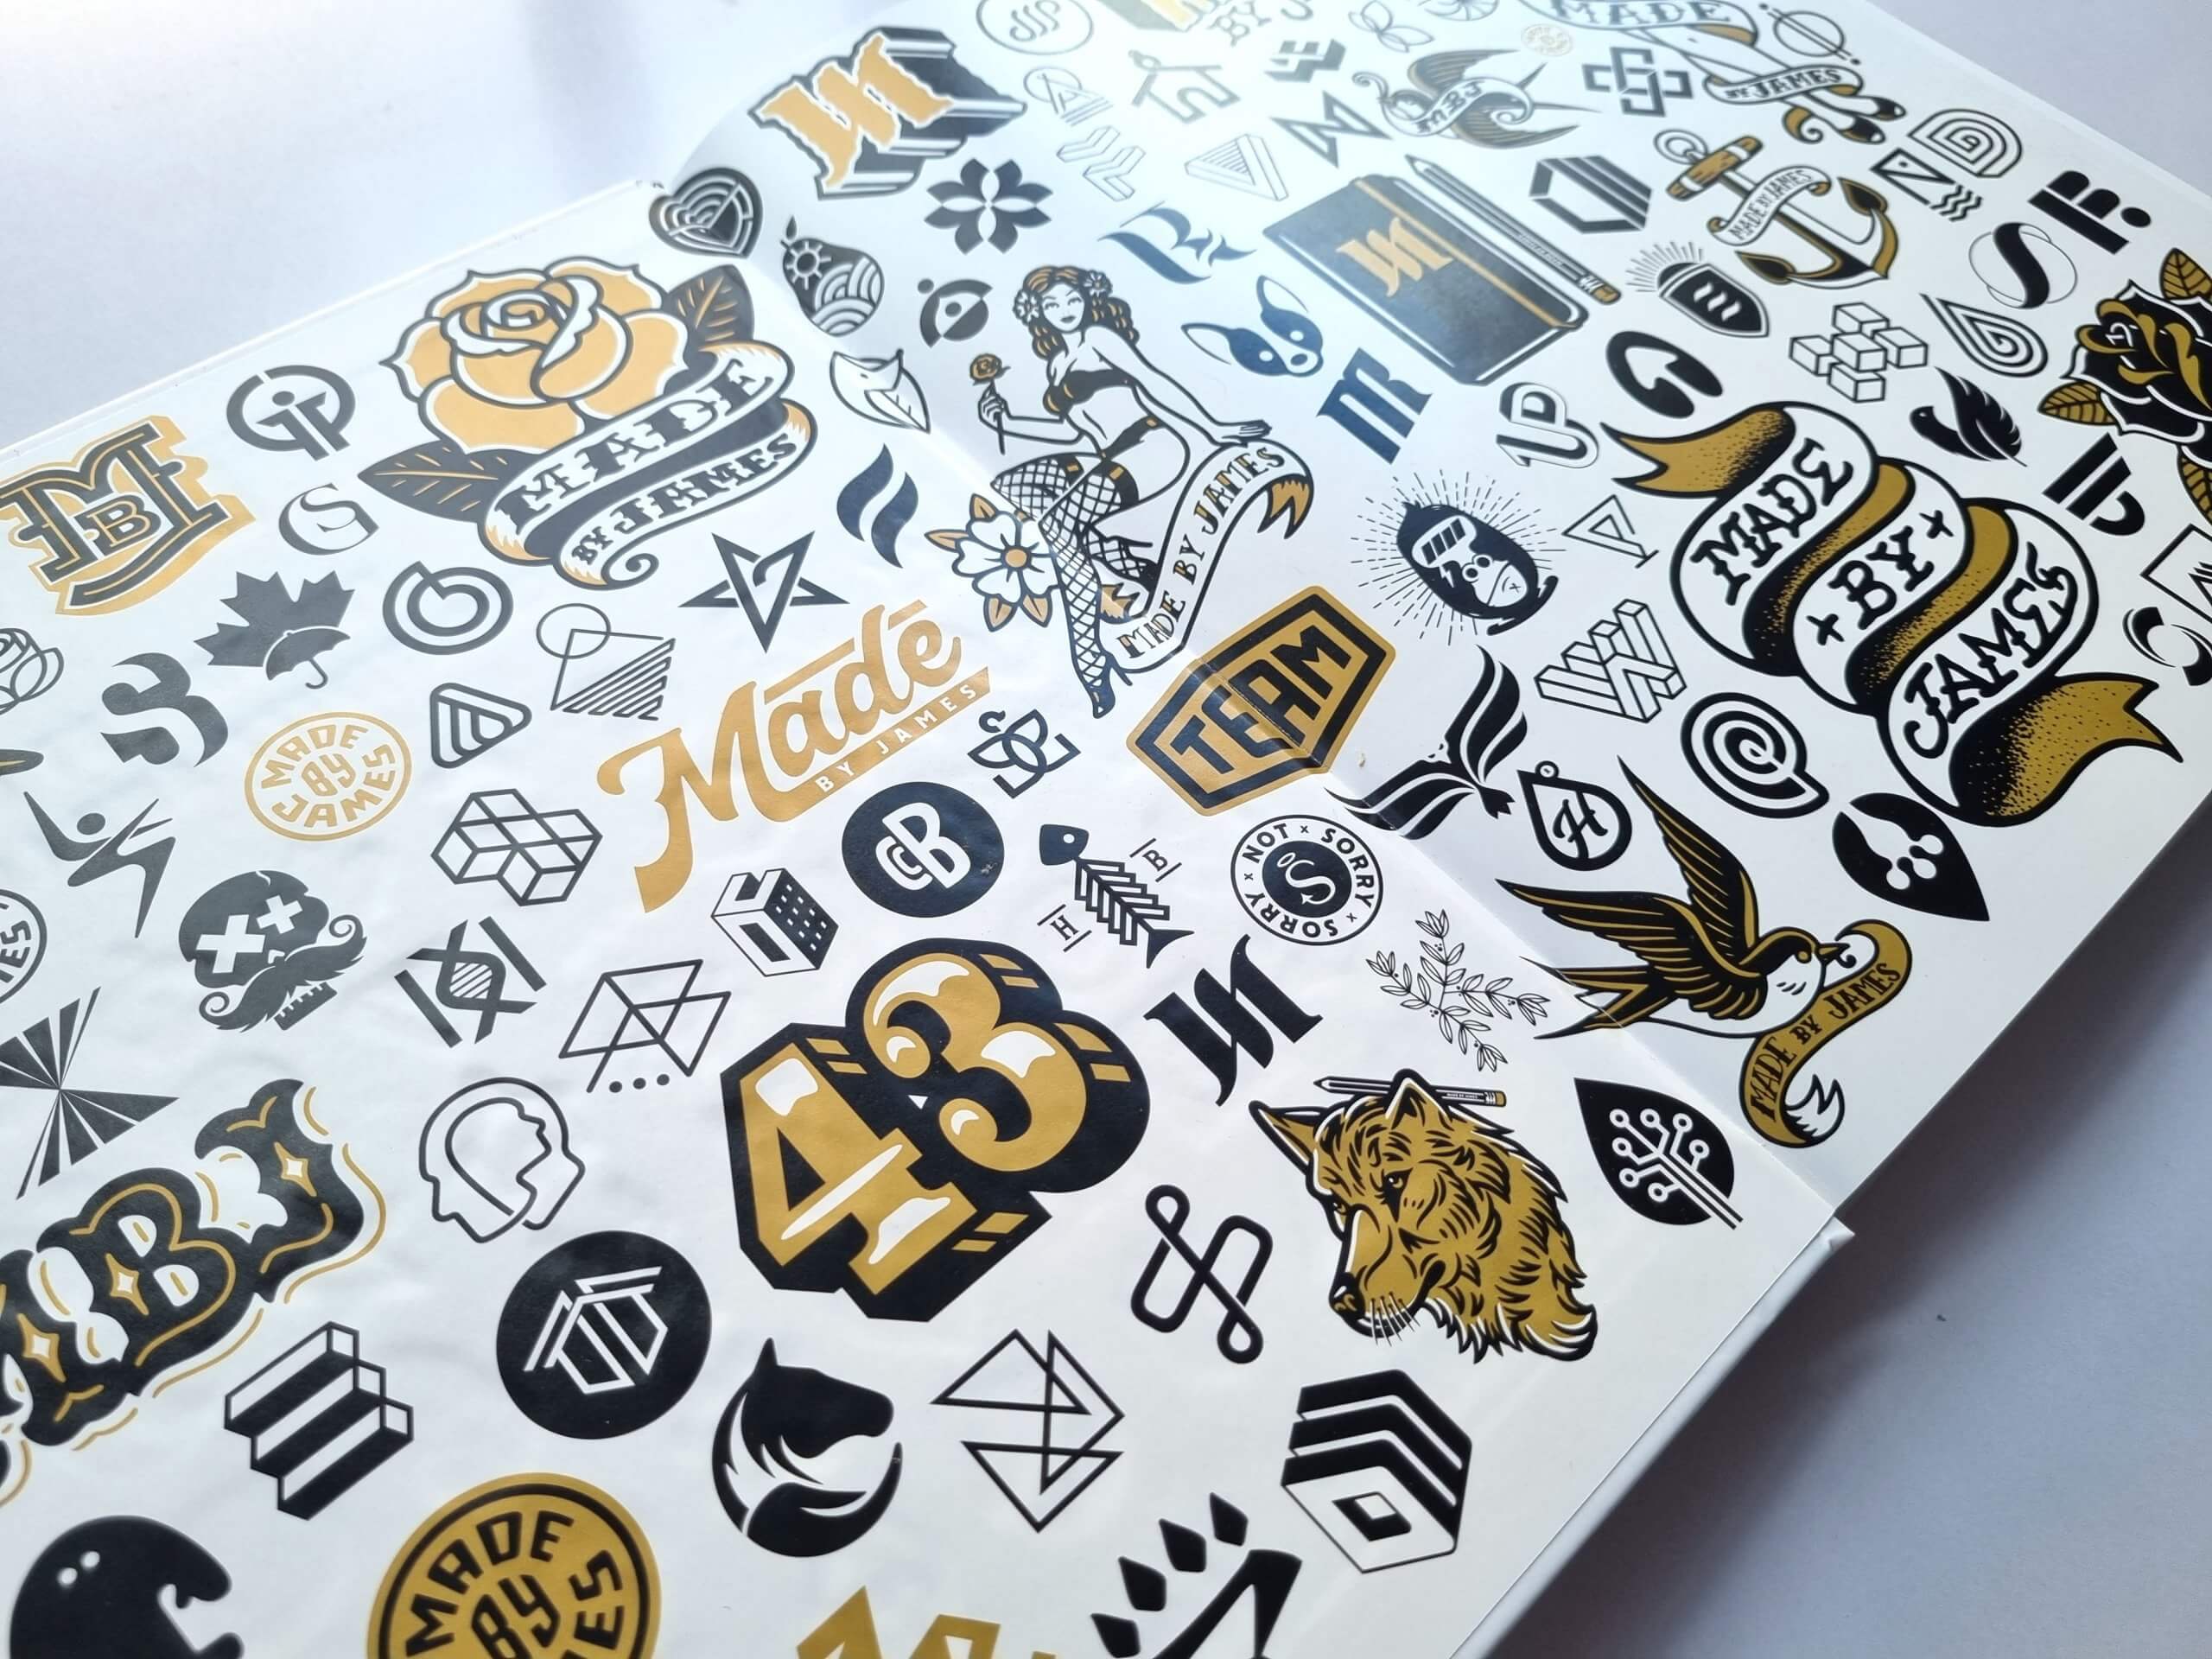 Logo Design Process Book Review - Made by James by James Martin